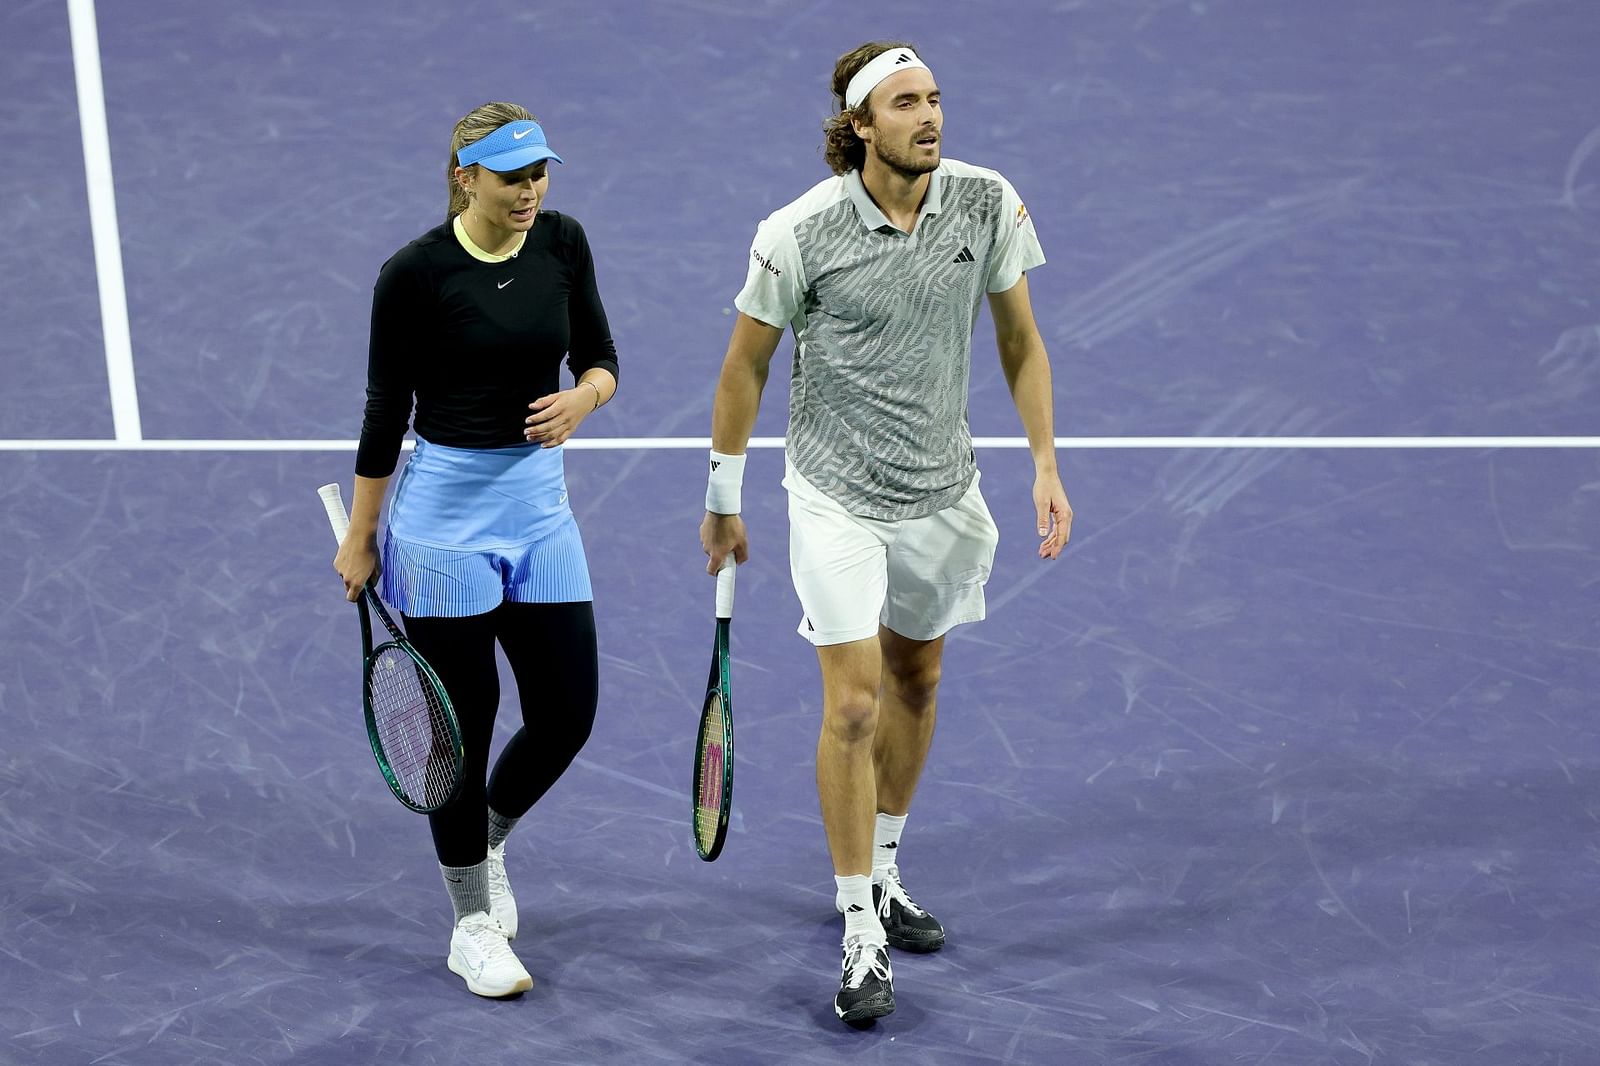 "We met in a moment that was really tough, but Stefanos Tsitsipas has